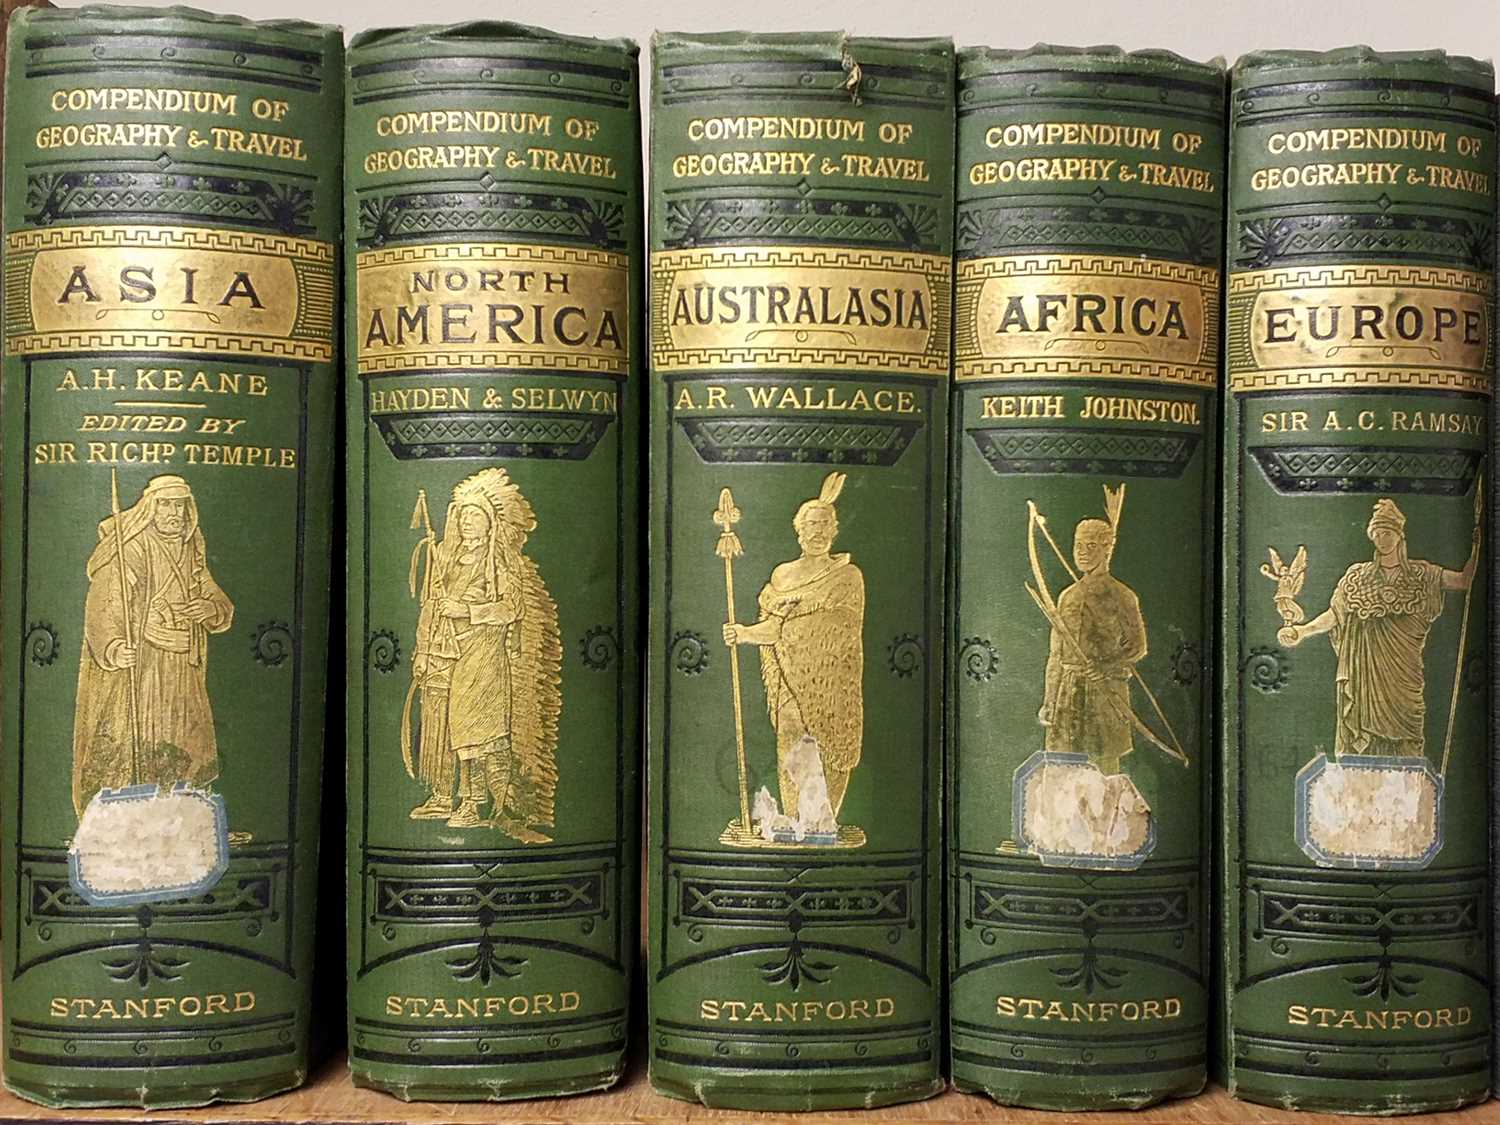 Lot 28 - Stanford (Edward [publisher]). Stanford's Compendium of Geography and Travel, 5 volumes, 1882-85